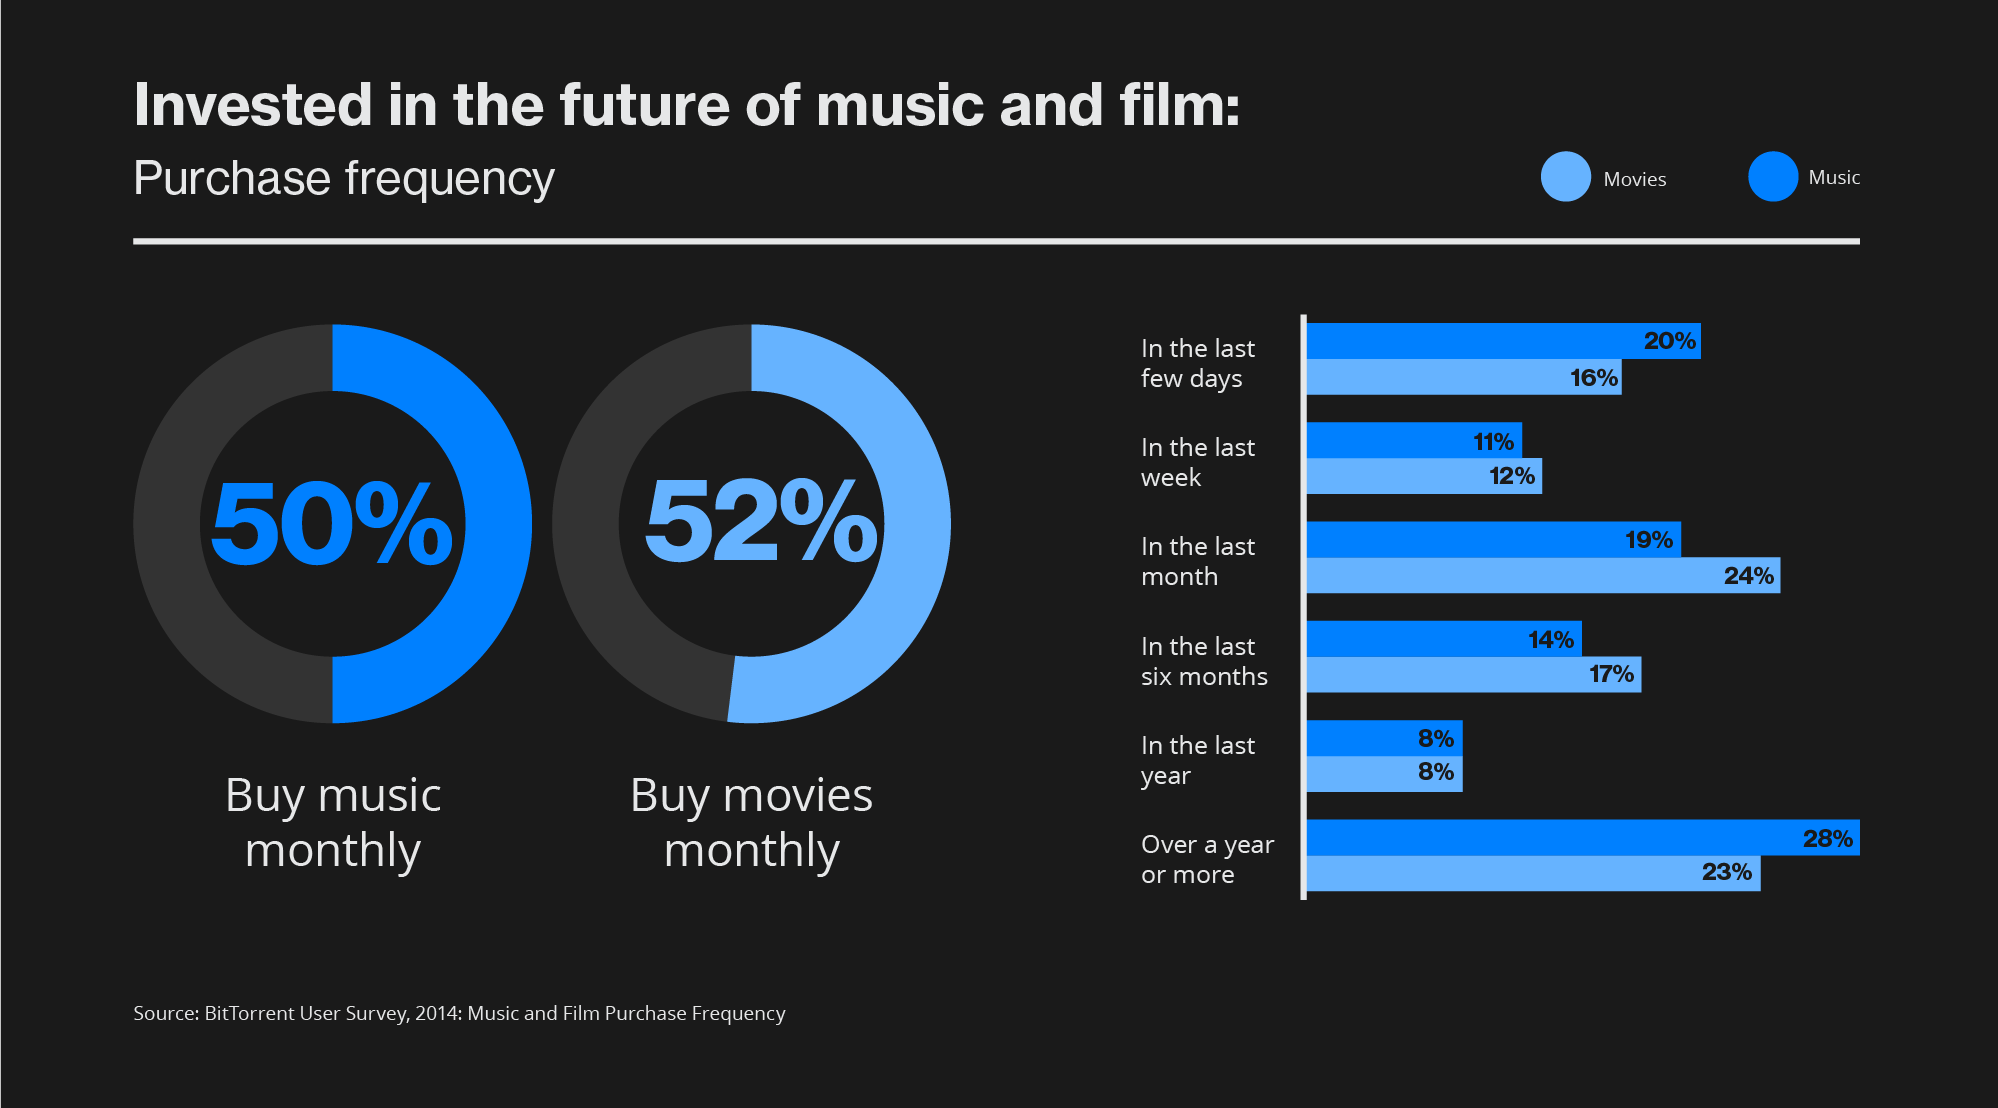 bittorrent user study, music and film purchase frequency